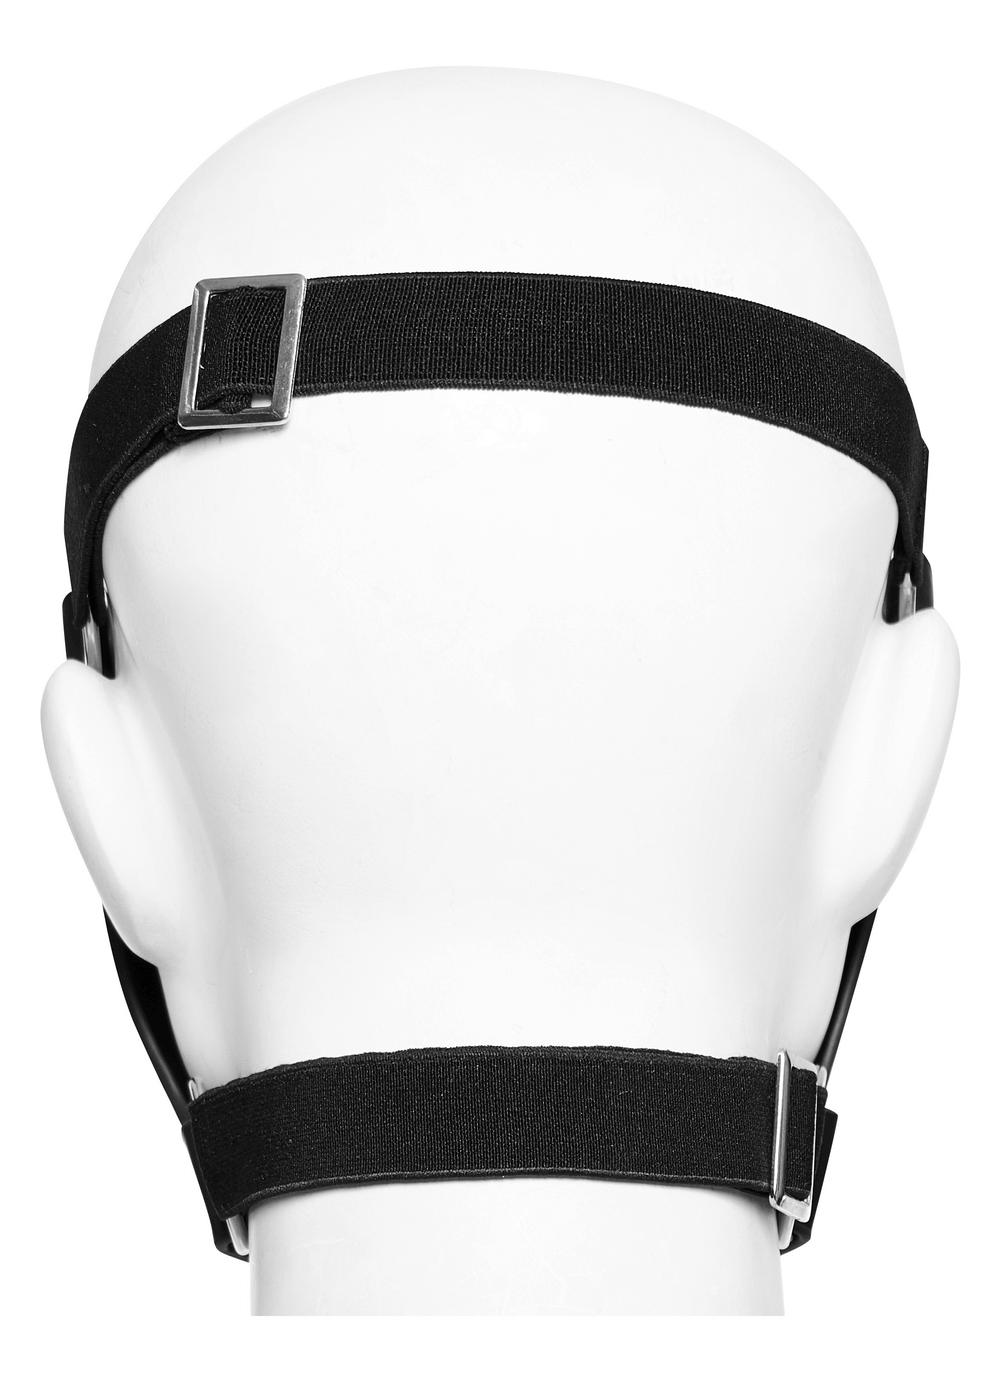 Edgy Punk Leather Half Mask with Metal Rivets